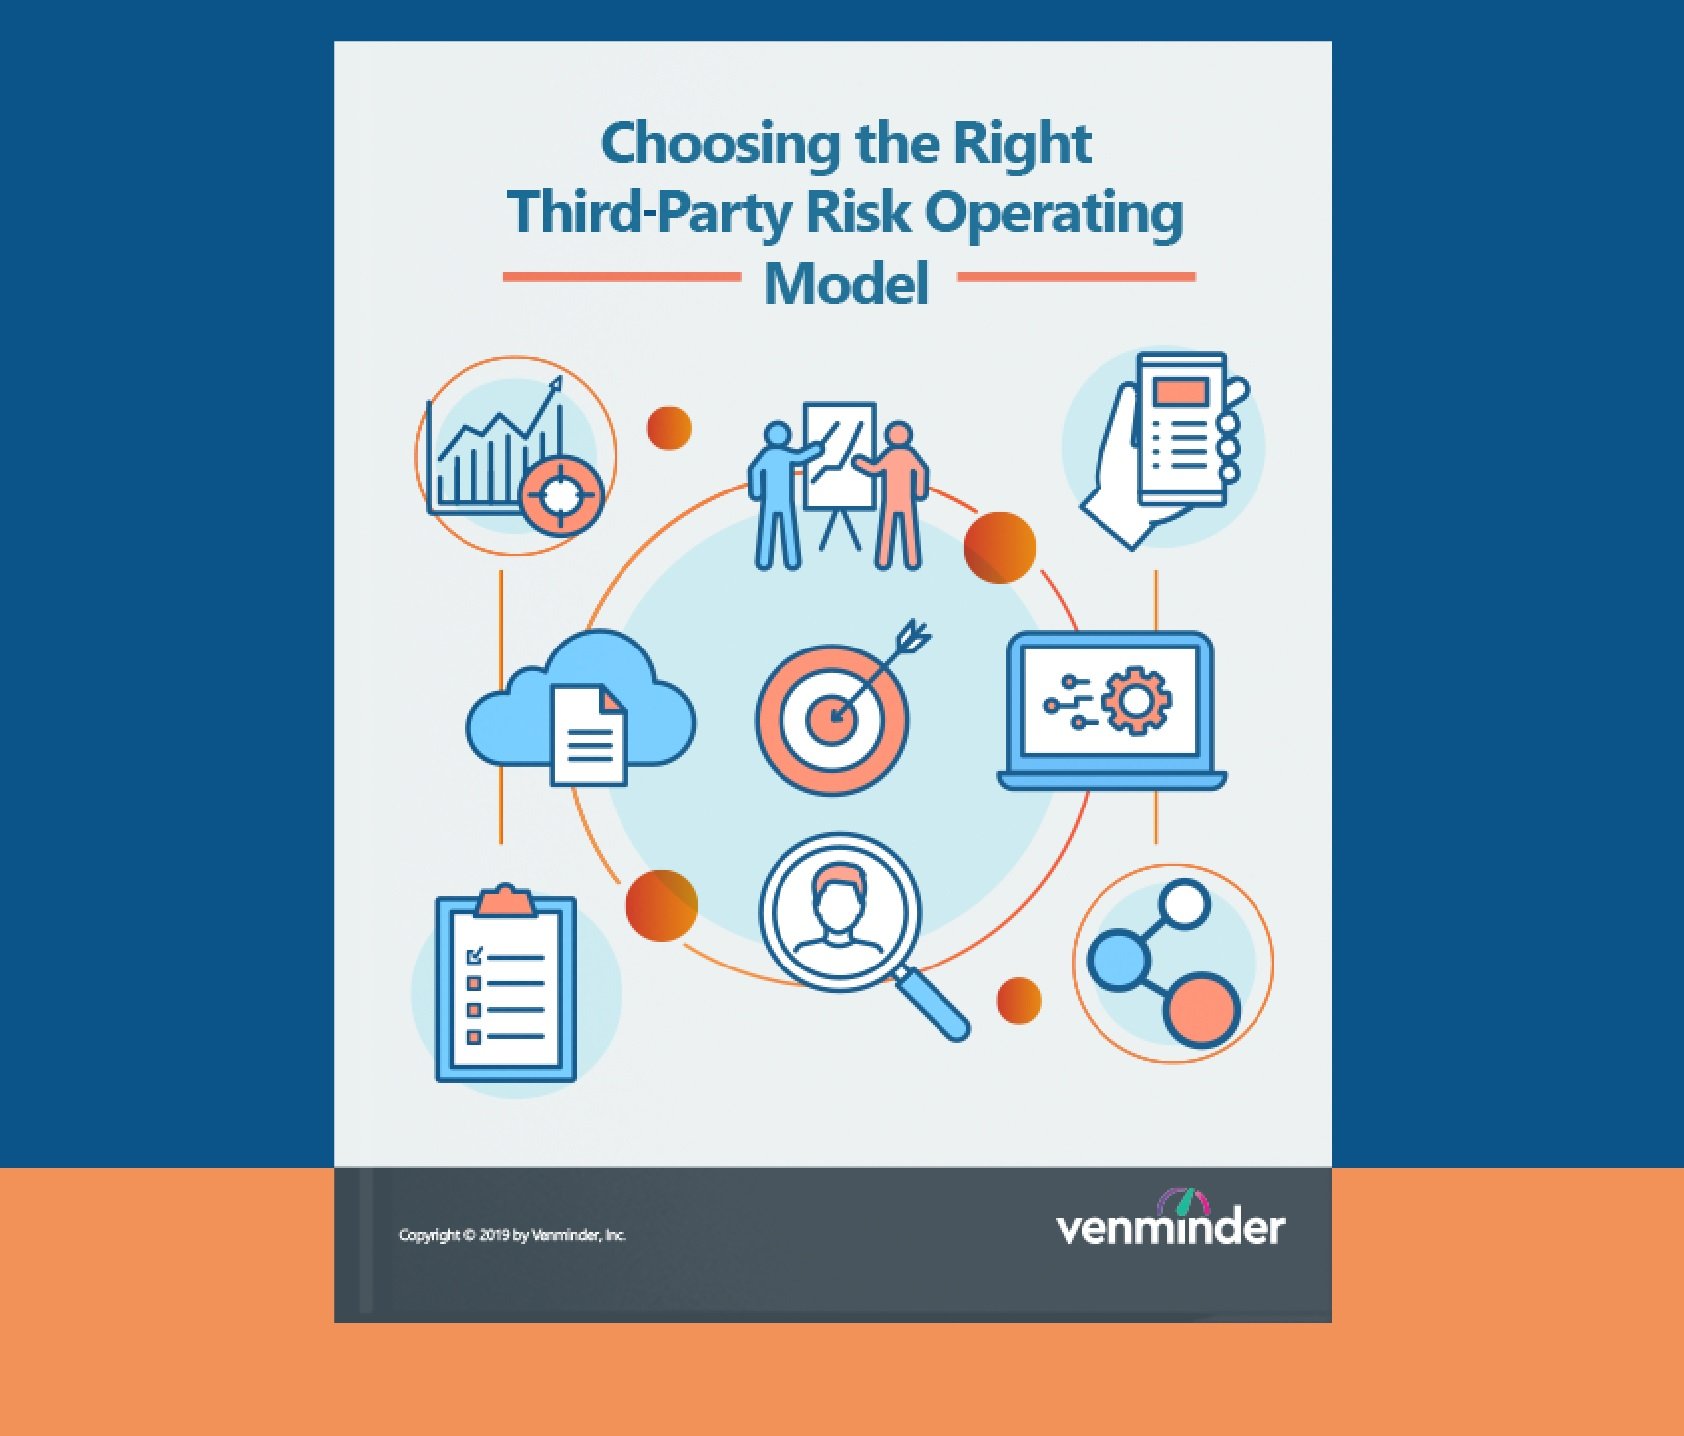 08.02.2019-resources-choosing-the-right-third-party-operating-model.jpg